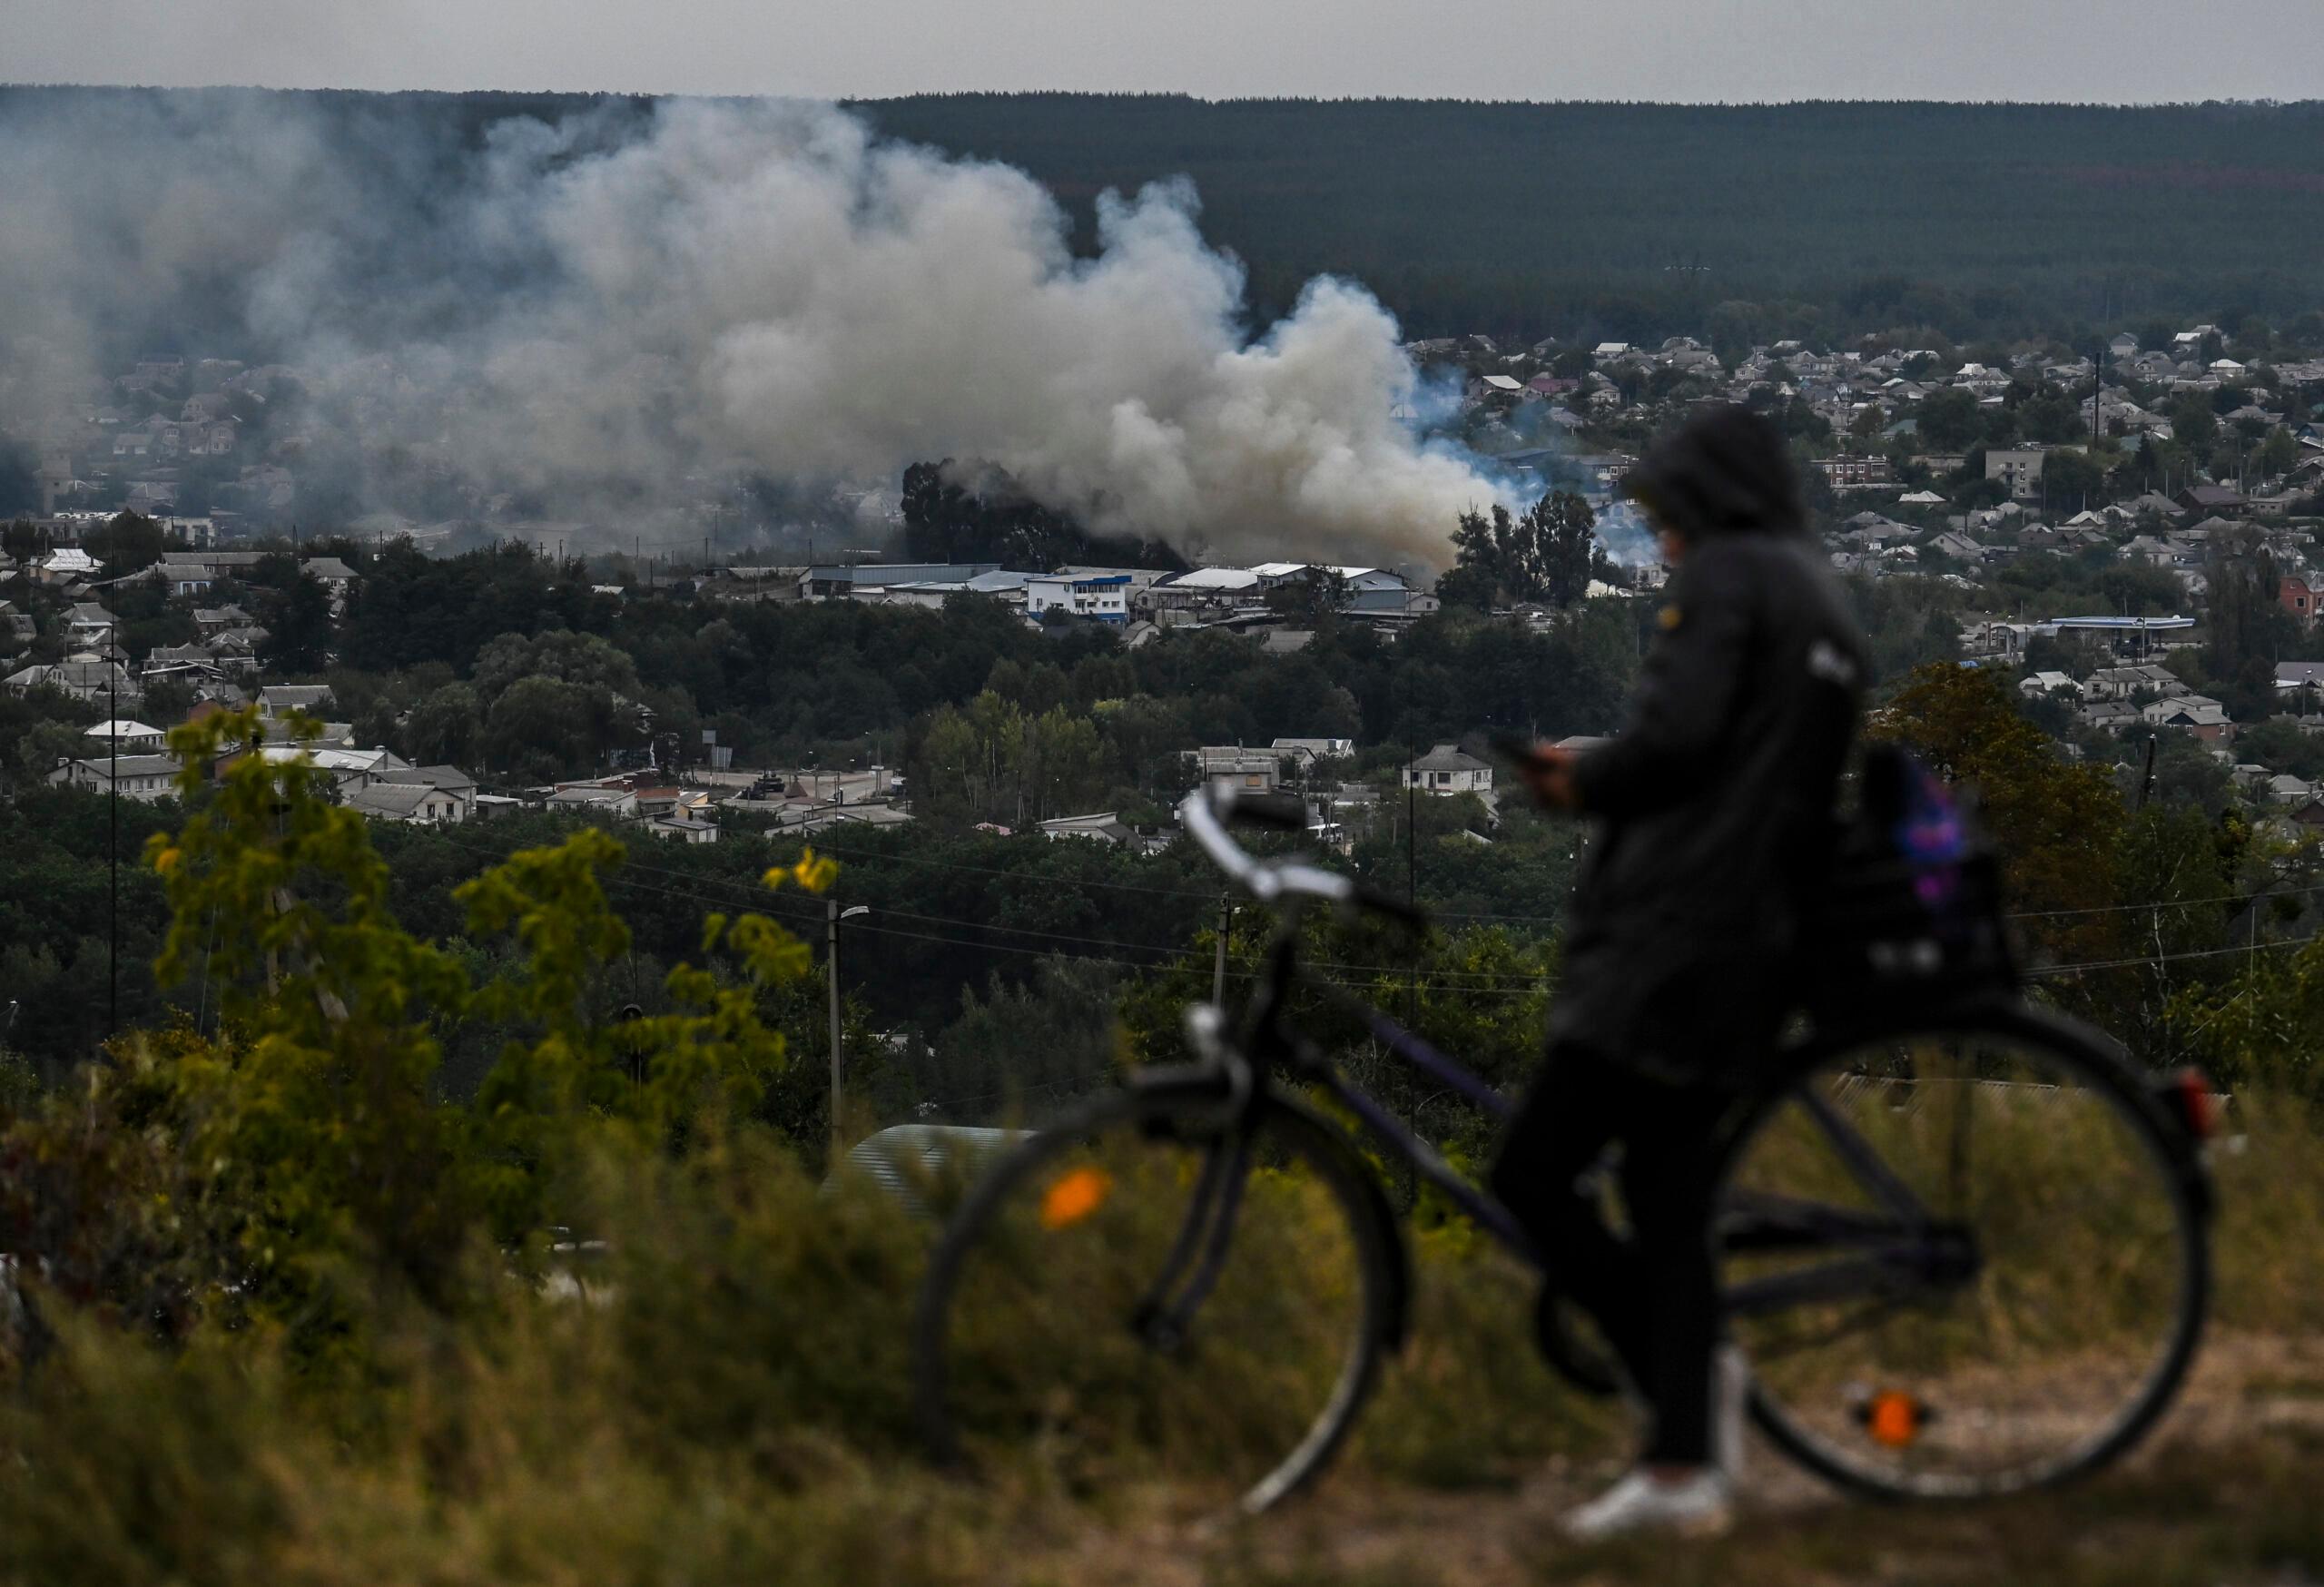 This photograph taken on September 11, 2022, shows a cyclist looking at a smartphone on a hill overlooking Izyum, Kharkiv Region, eastern Ukraine, amid the Russian invasion of Ukraine. - Ukraine forces said that their lightning counter-offensive took back more ground in the past 24 hours, as Russia replied with strikes on some of the recaptured ground. The territorial shifts were one of Russia's biggest reversals since its forces were turned back from Kyiv in the earliest days of the nearly seven months of fighting, yet Moscow signalled it was no closer to agreeing a negotiated peace. (Photo by Juan BARRETO / AFP)